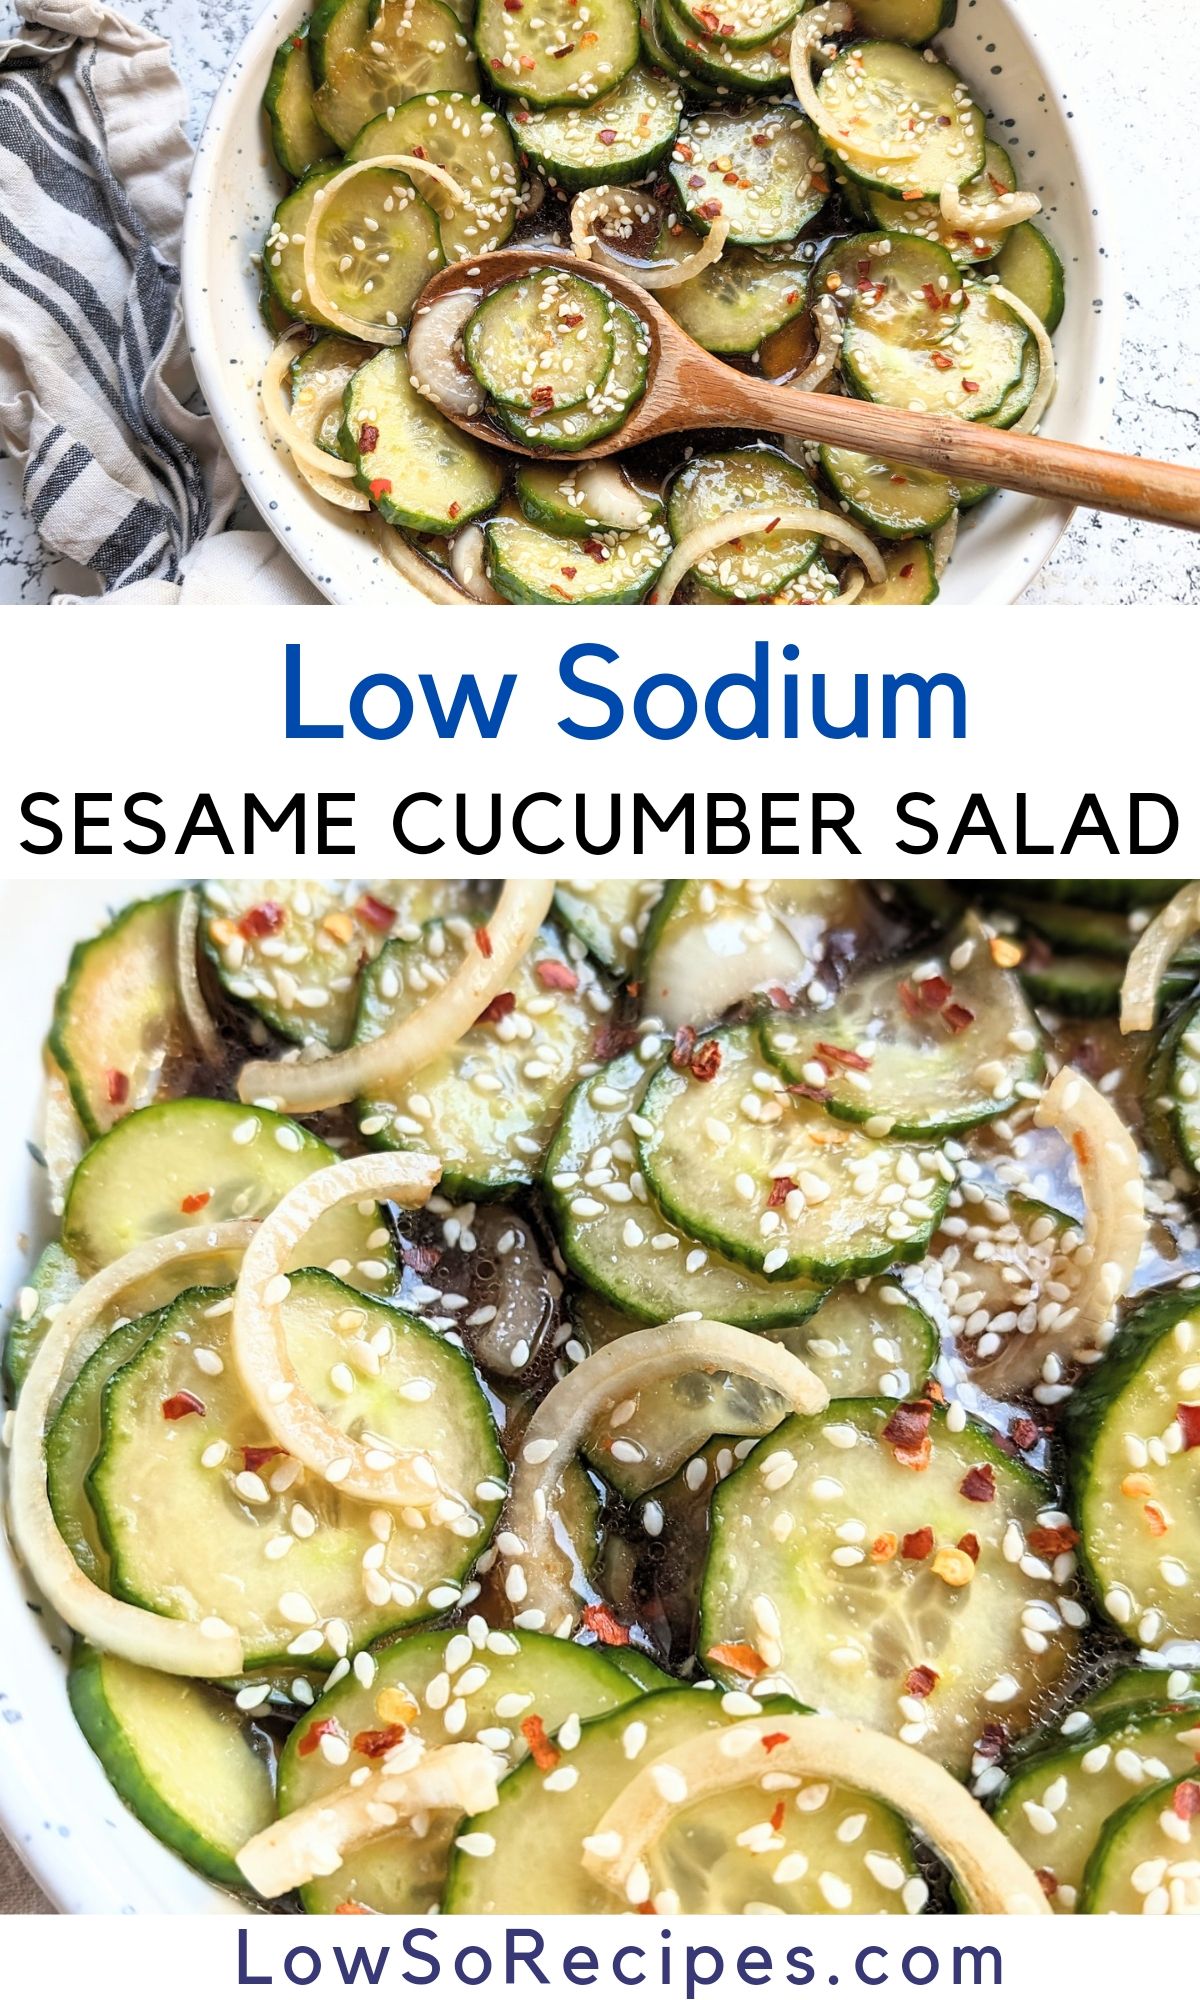 low sodium sesame cucumber salad recipe with thinly sliced english or Persian cucumbers in a low sodium soy sauce dressing